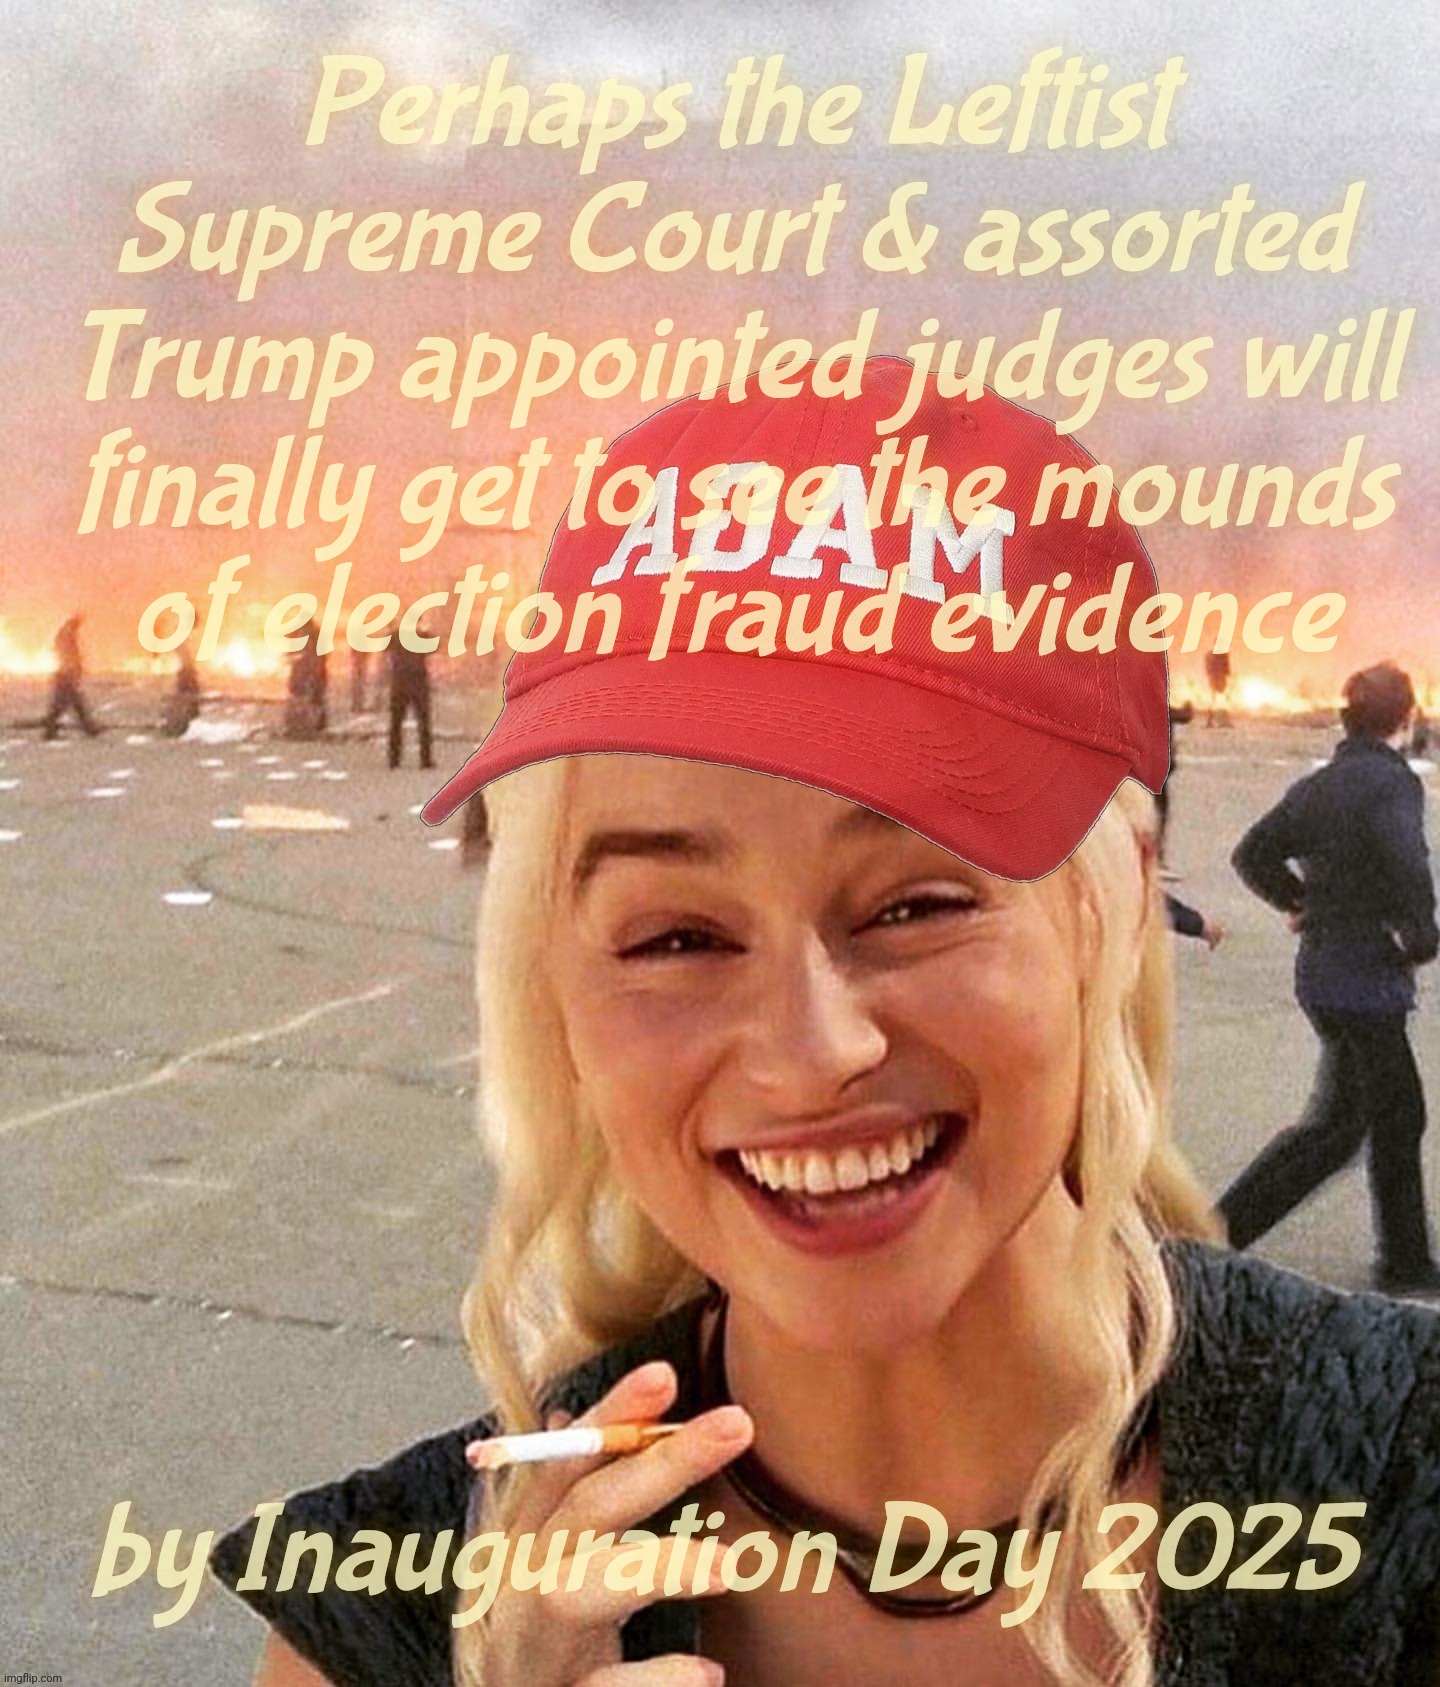 2000 Mules x 0 = 0 | Perhaps the Leftist
Supreme Court & assorted Trump appointed judges will
finally get to see the mounds
of election fraud evidence; by Inauguration Day 2025 | image tagged in disaster smoker girl maga edition,2000 mules,faux election fraud,2020 election,trump tried to steal the election,magat idiocracy | made w/ Imgflip meme maker